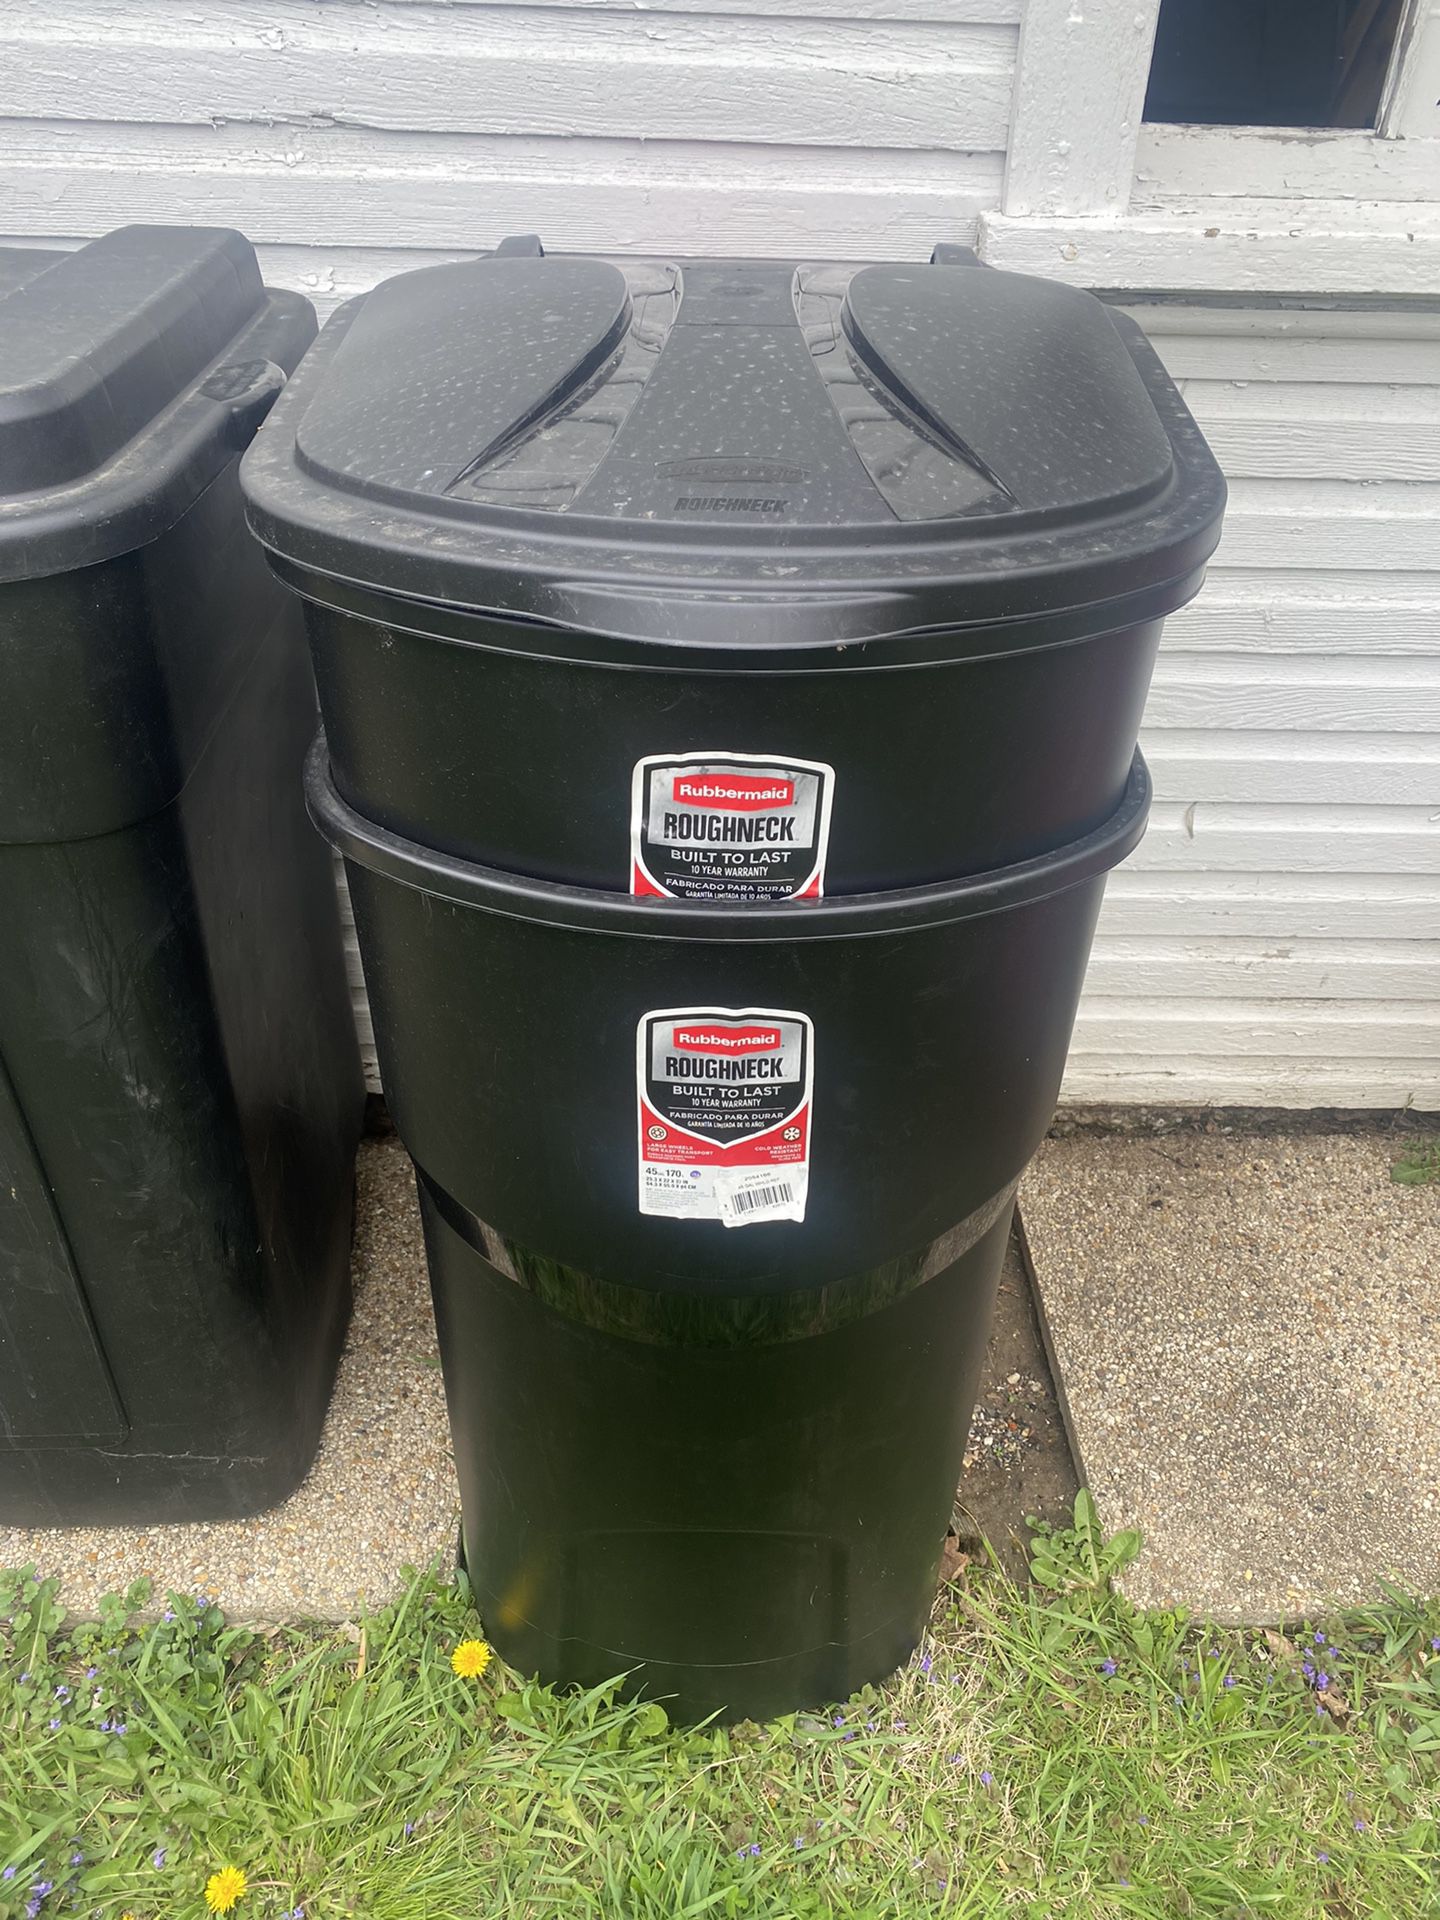 Rubbermaid Roughneck 45 Gal Trash Cans for Sale in Wauconda, IL